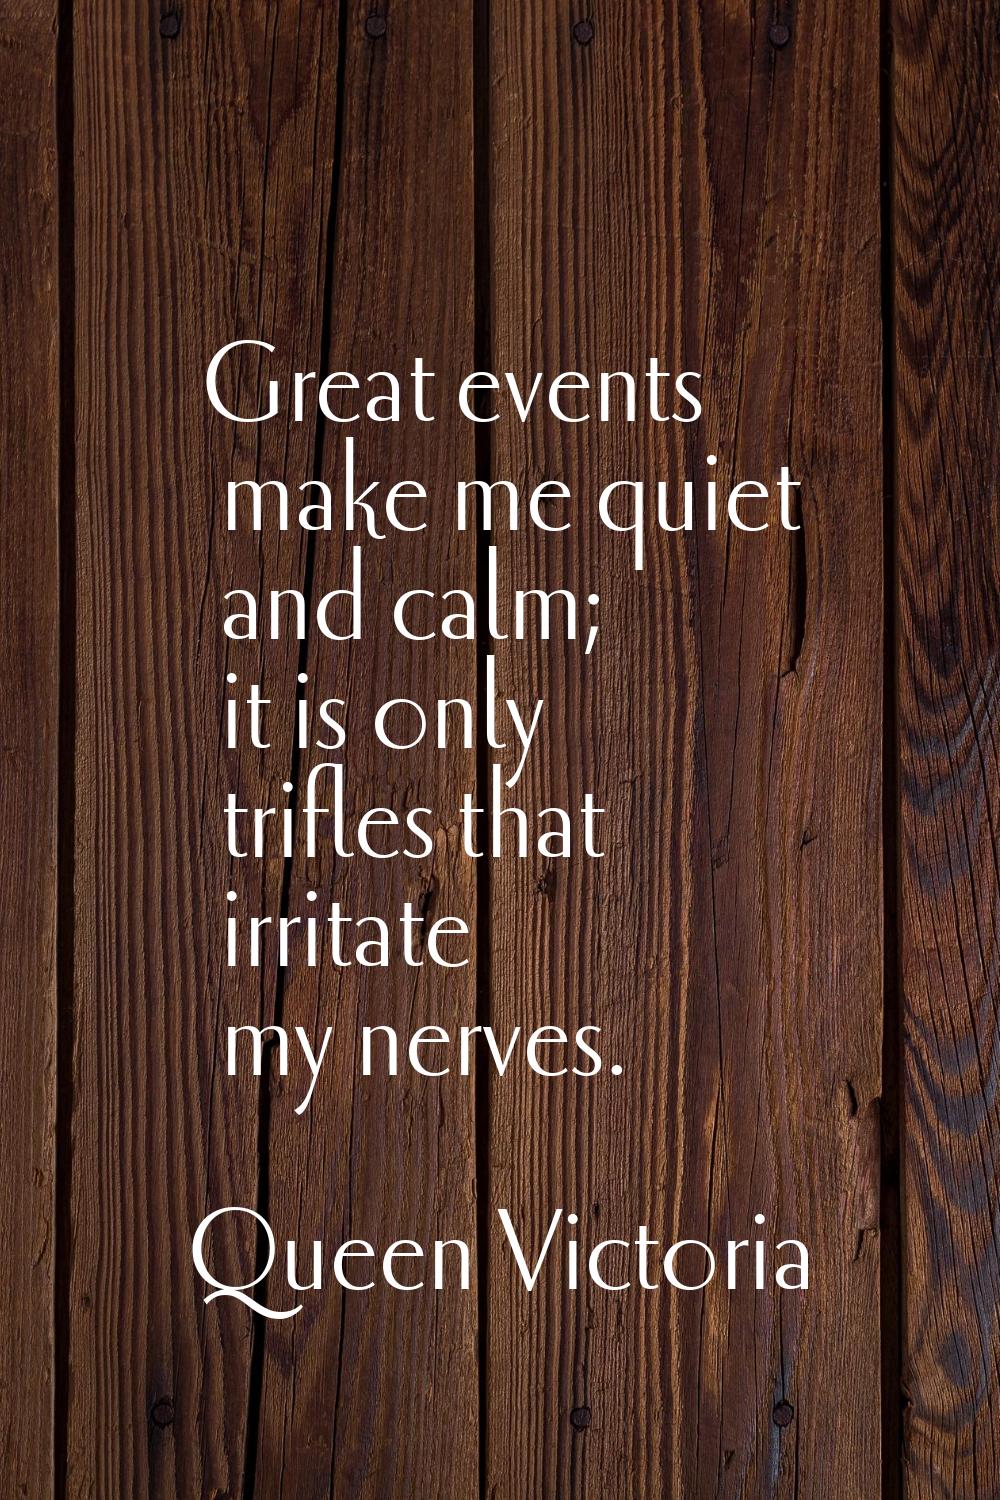 Great events make me quiet and calm; it is only trifles that irritate my nerves.